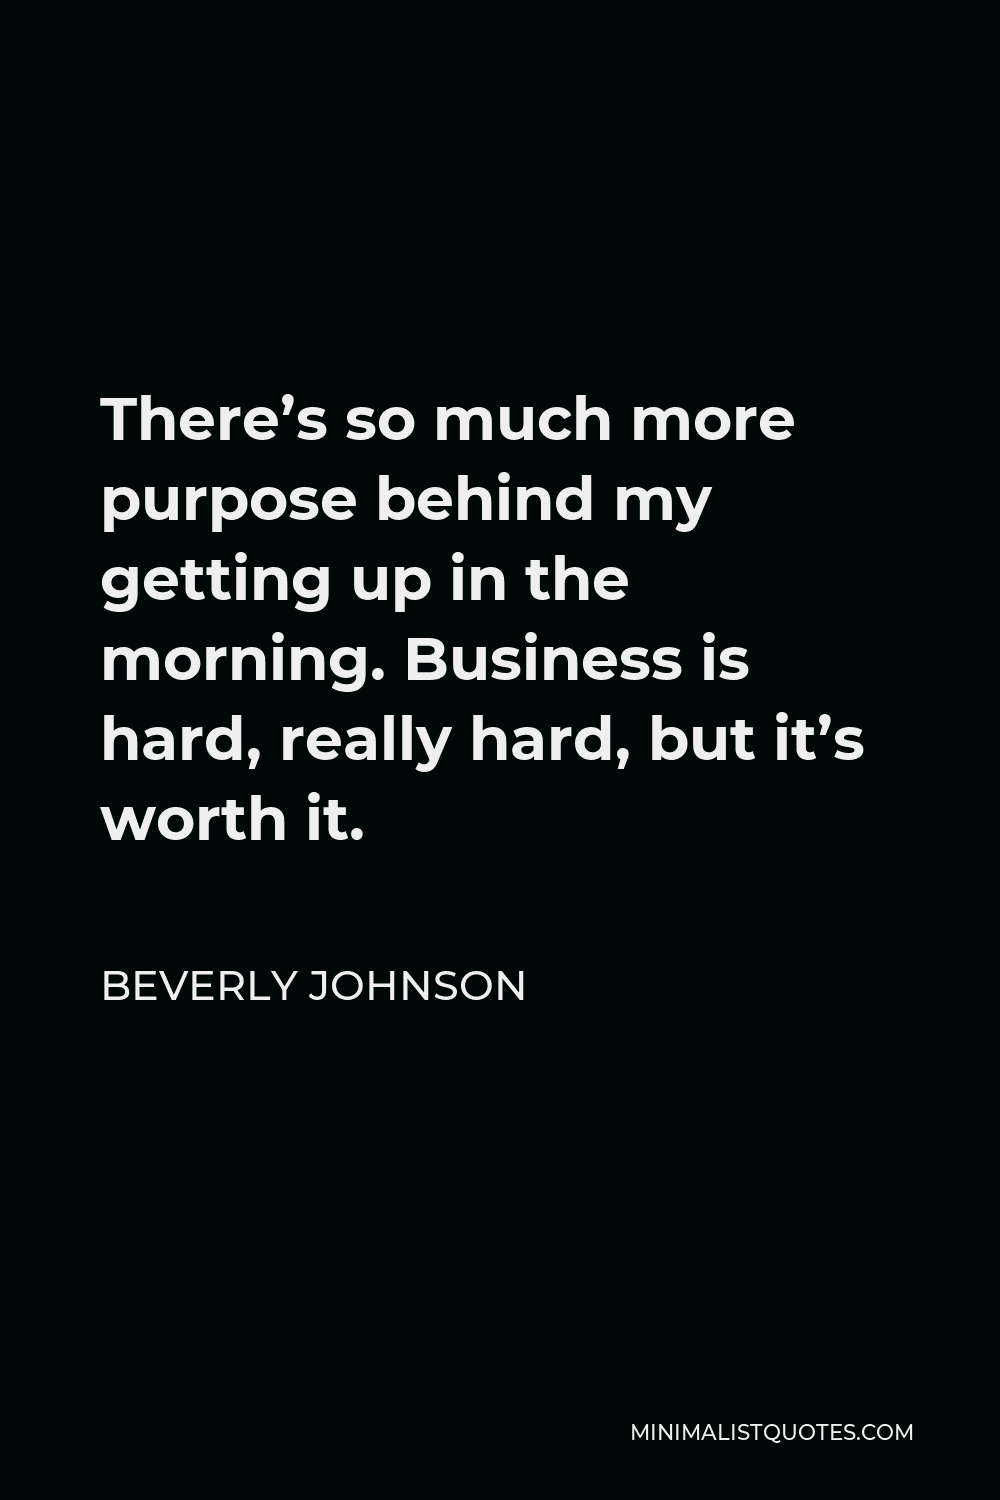 Beverly Johnson Quote - There’s so much more purpose behind my getting up in the morning. Business is hard, really hard, but it’s worth it.